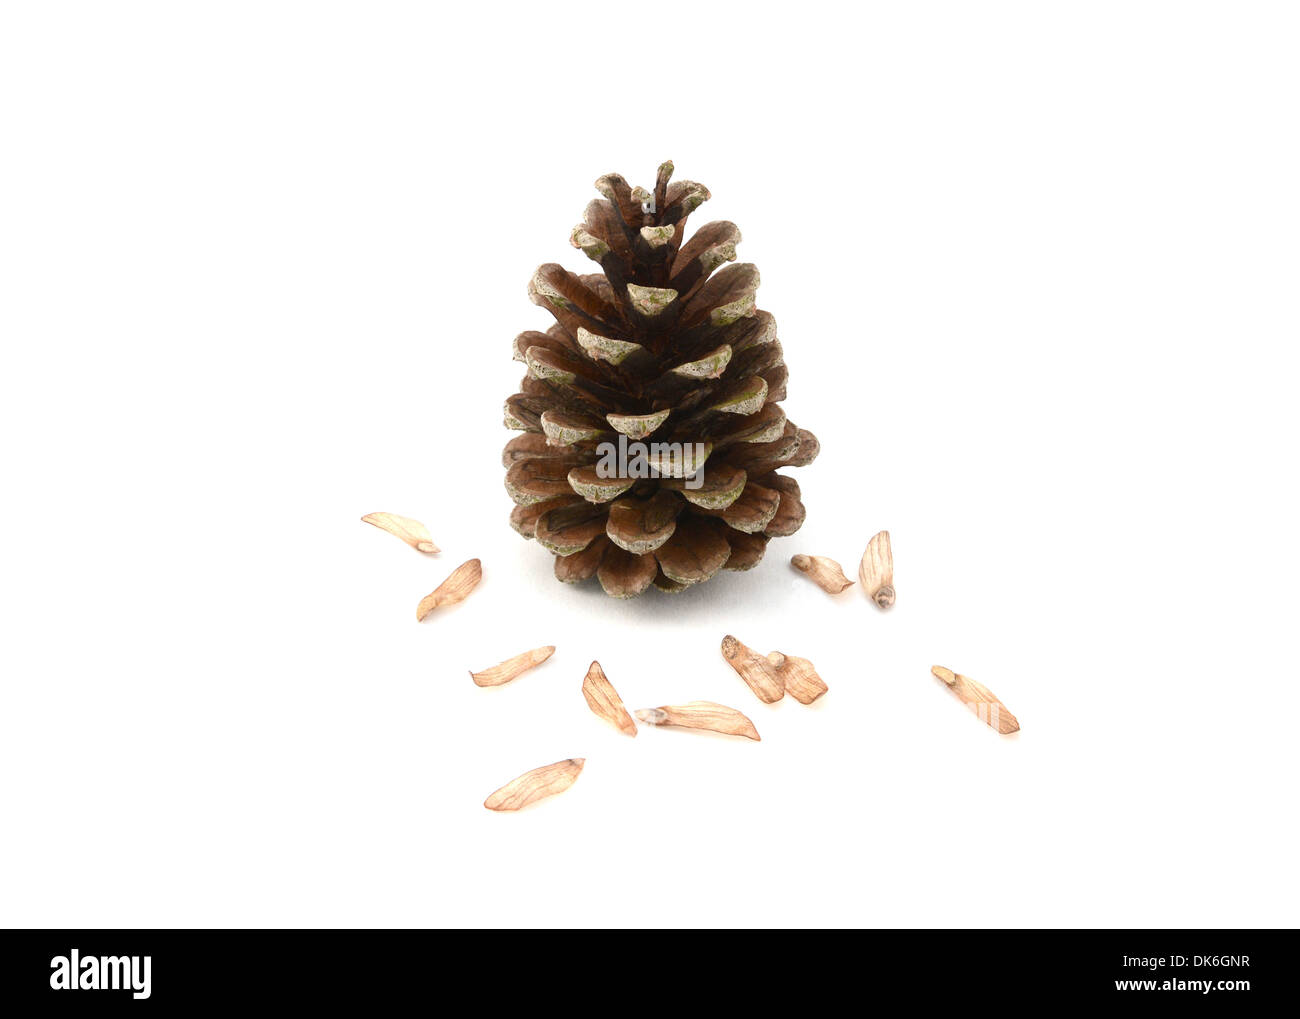 Large fir cone surrounded by delicate seeds, isolated on a white background Stock Photo